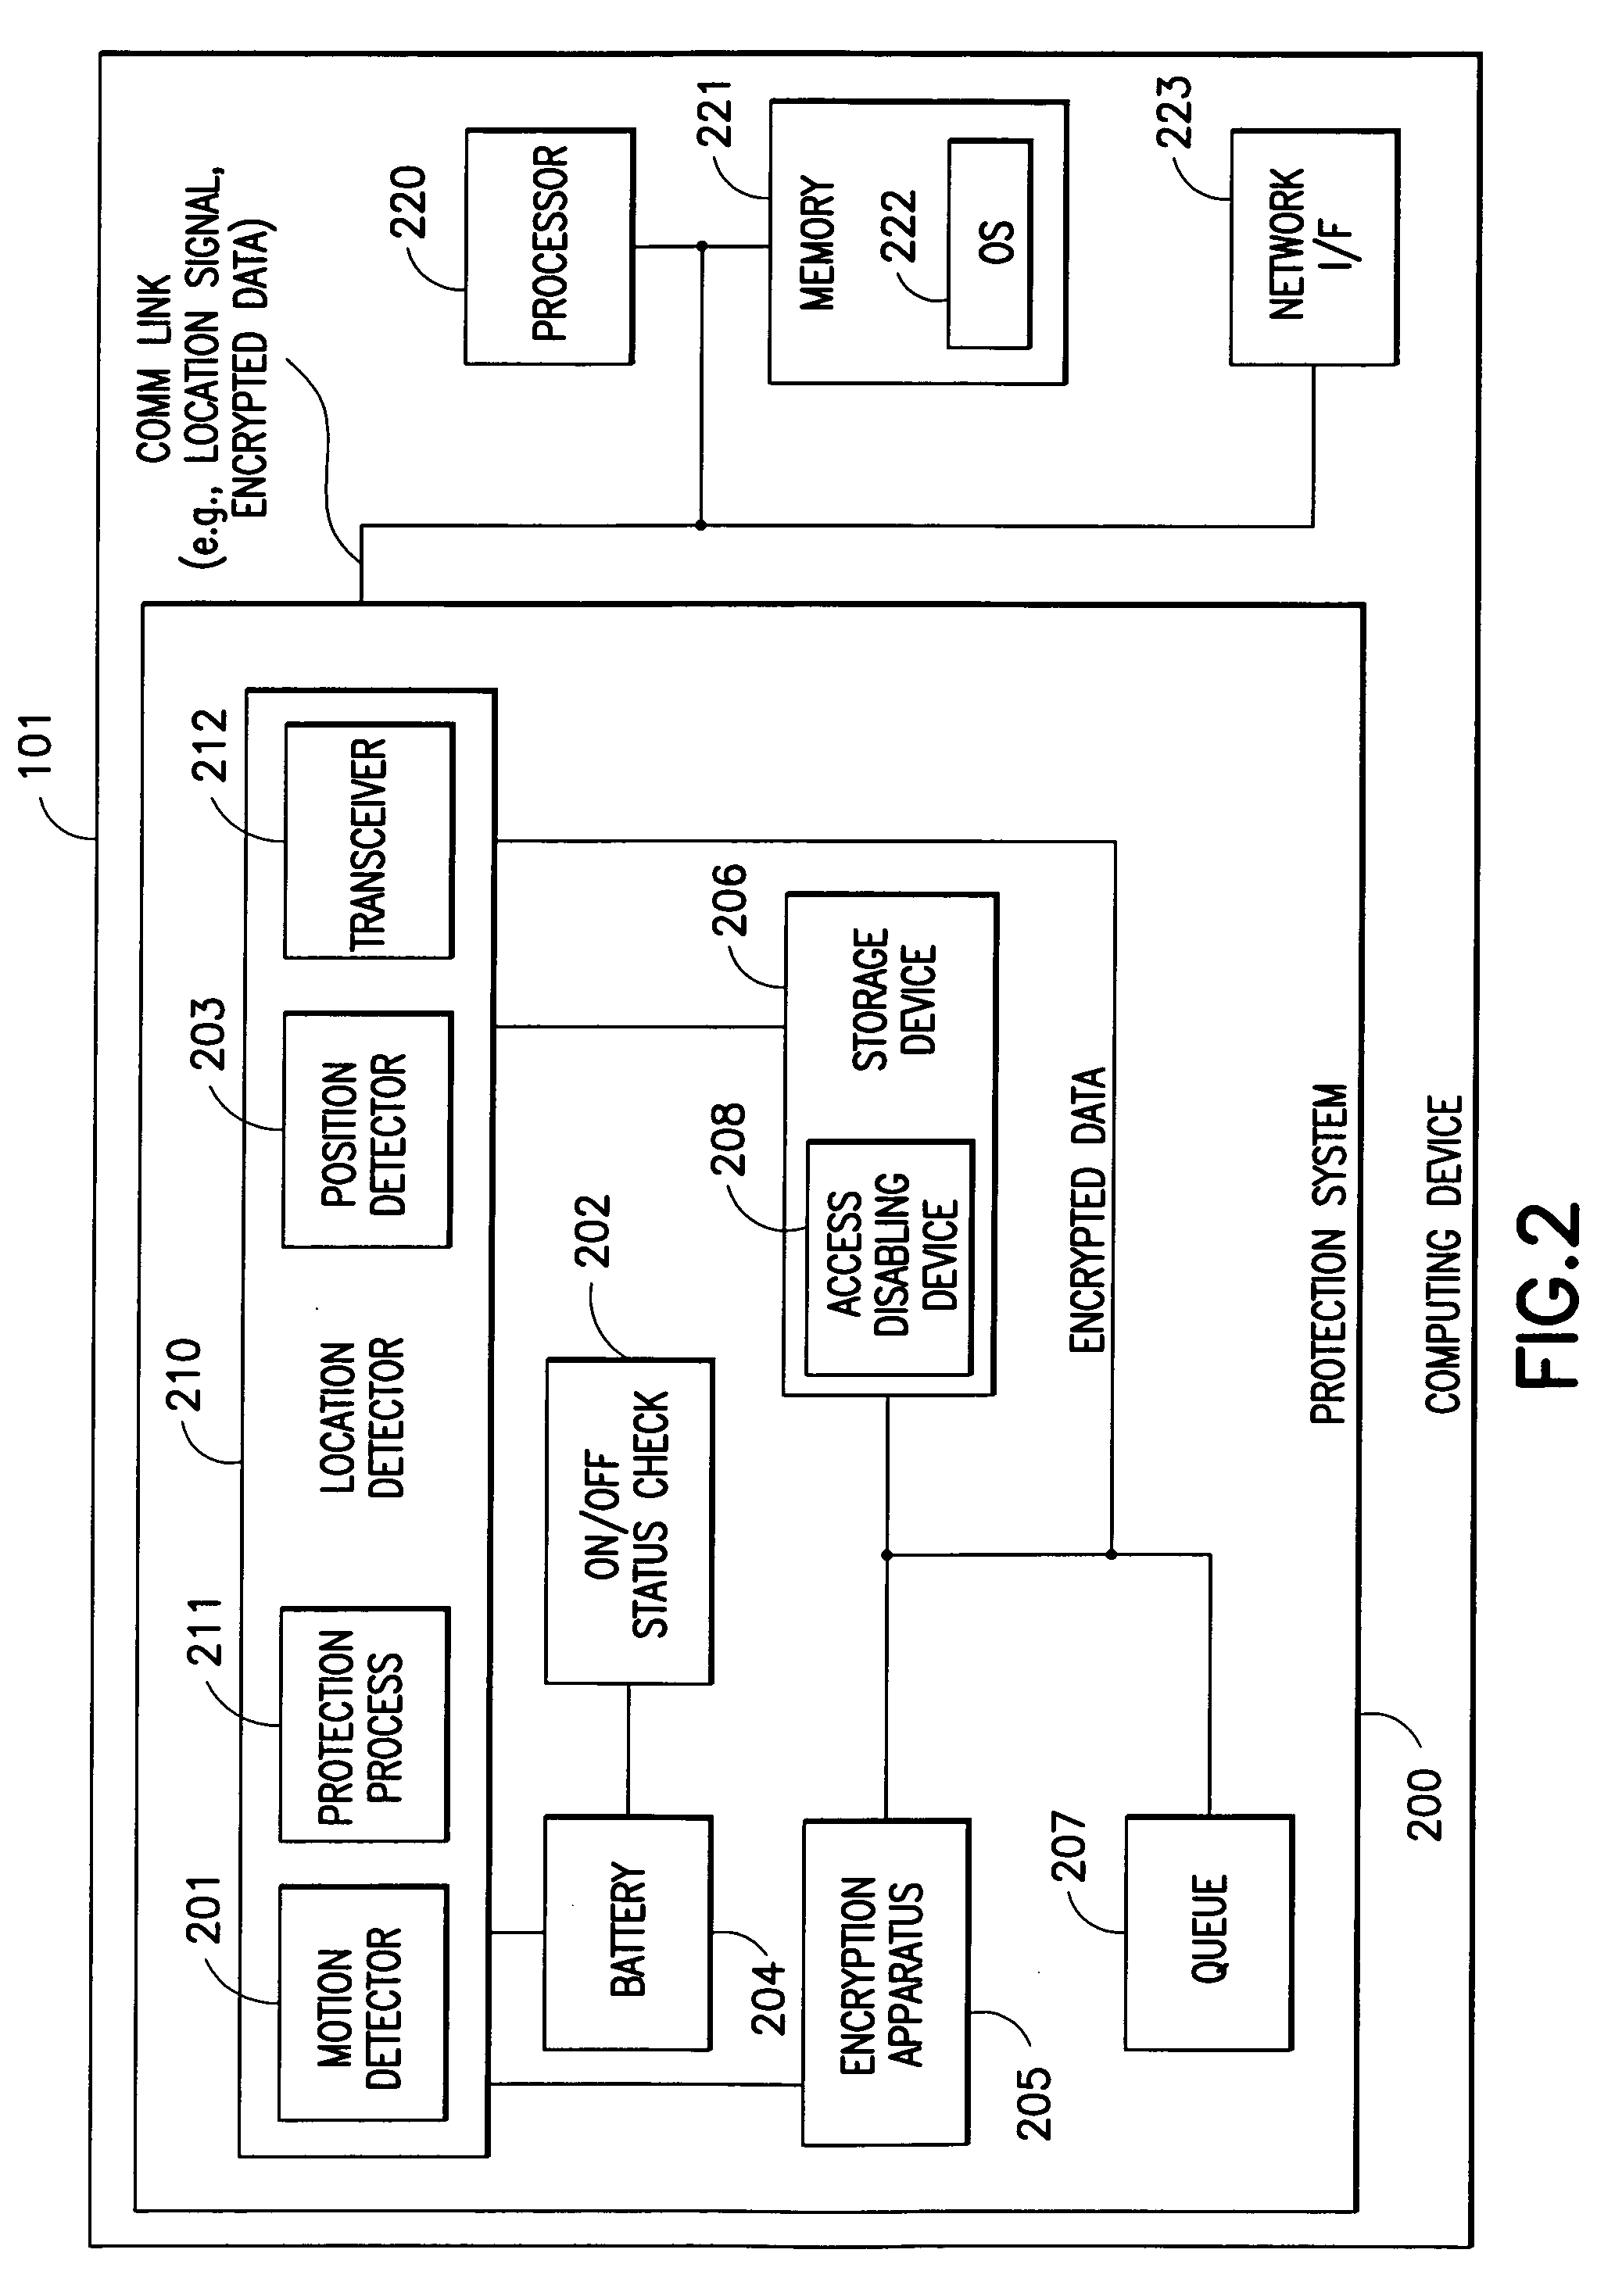 Protection of information in computing devices